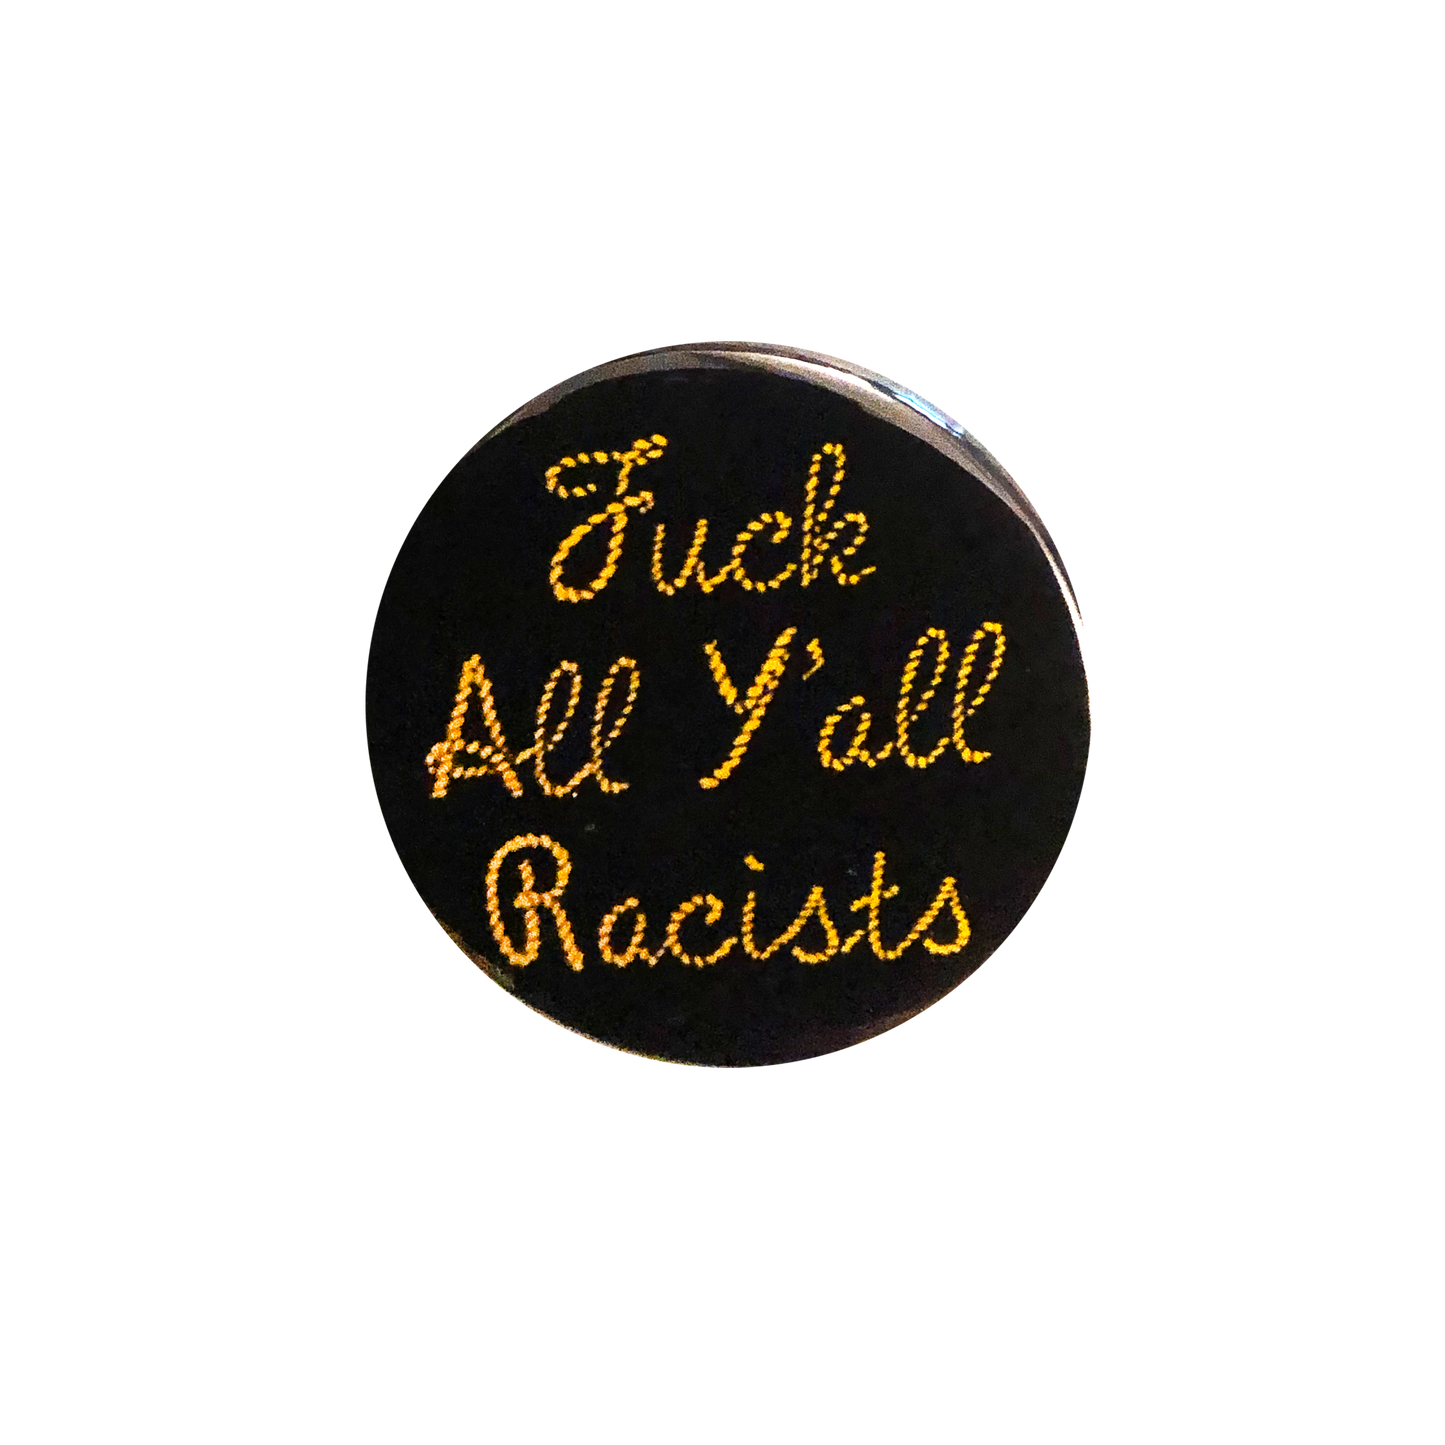 Fuck All Y'all Racists Button